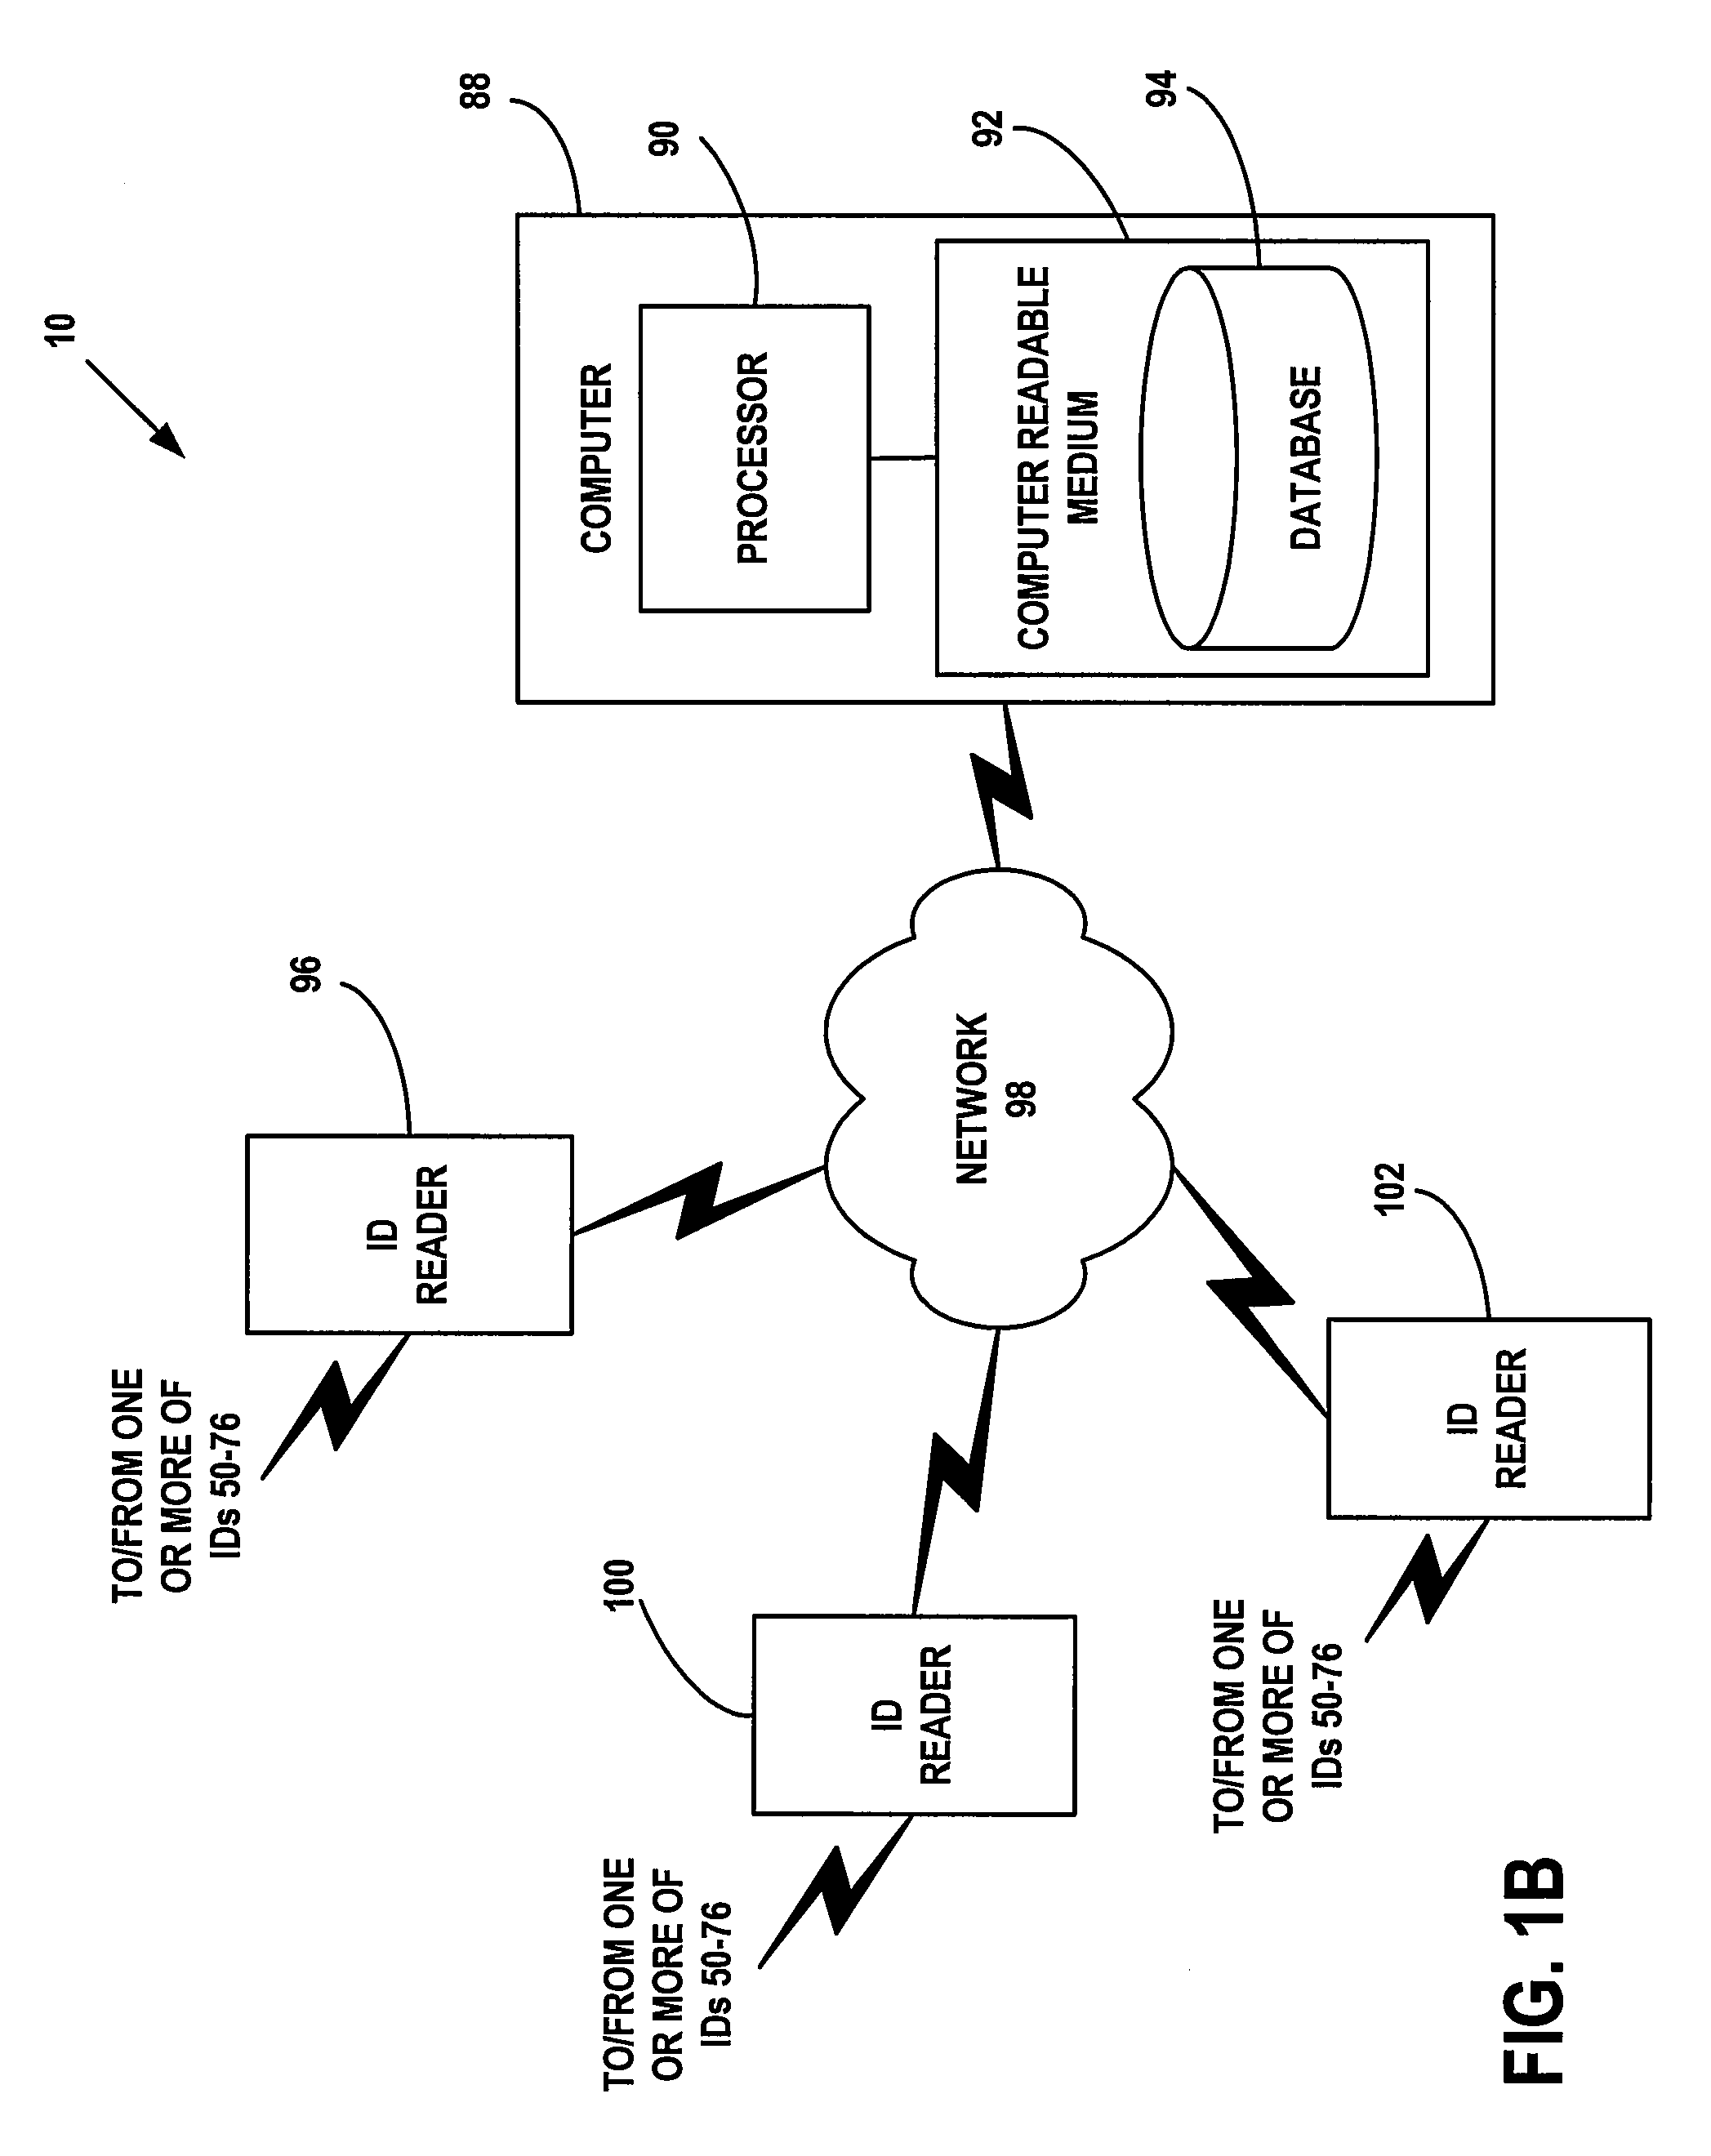 Apparatus and methods for evaluating systems associated with wellheads